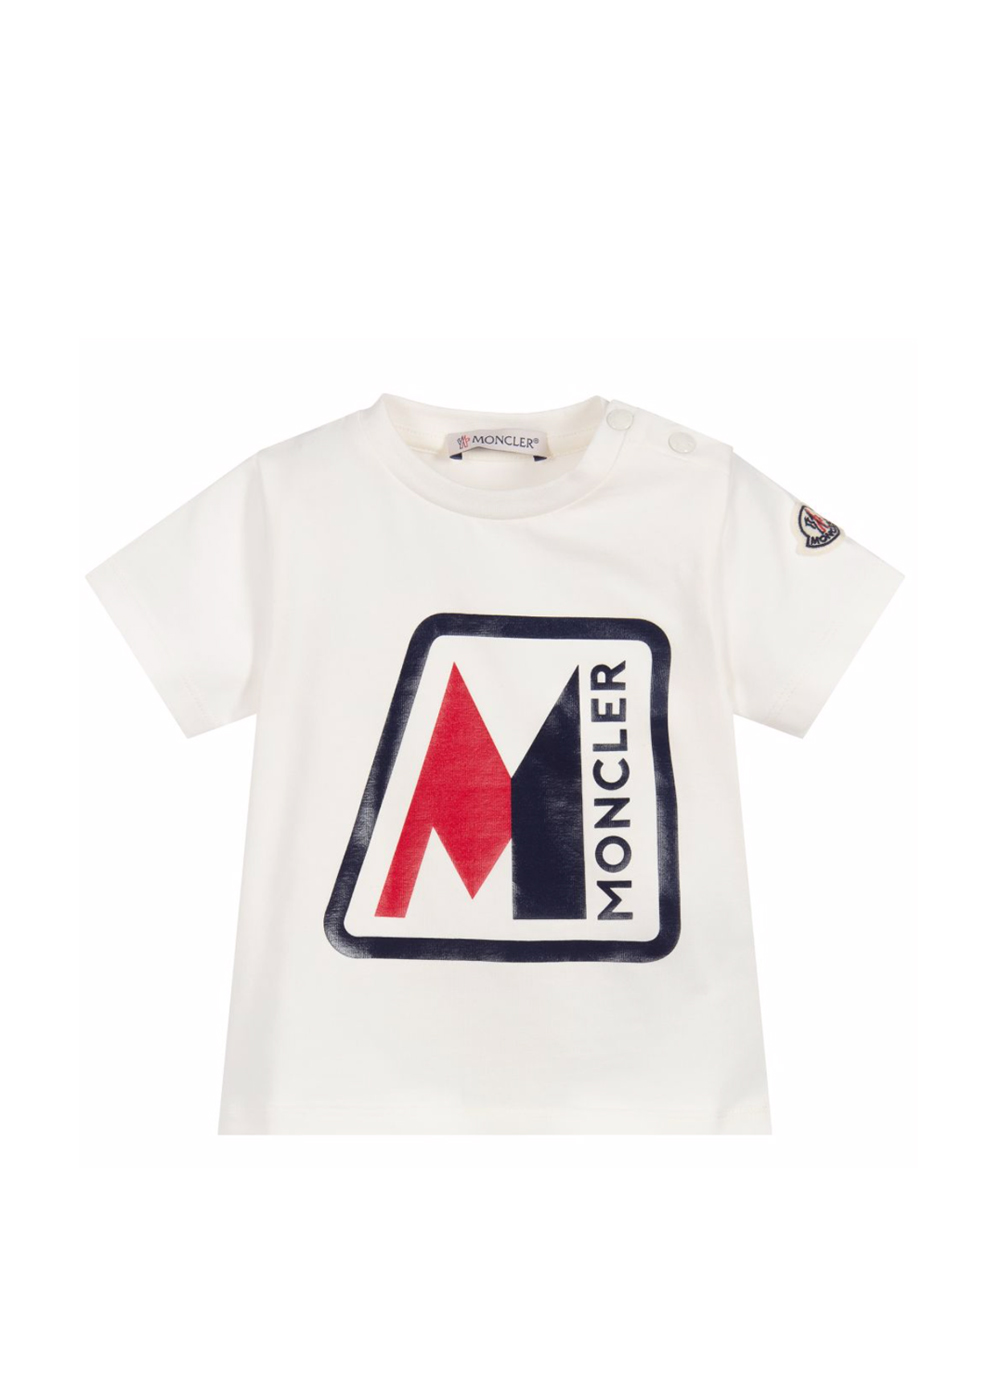 Featured image for “Moncler T-shirt neonato”